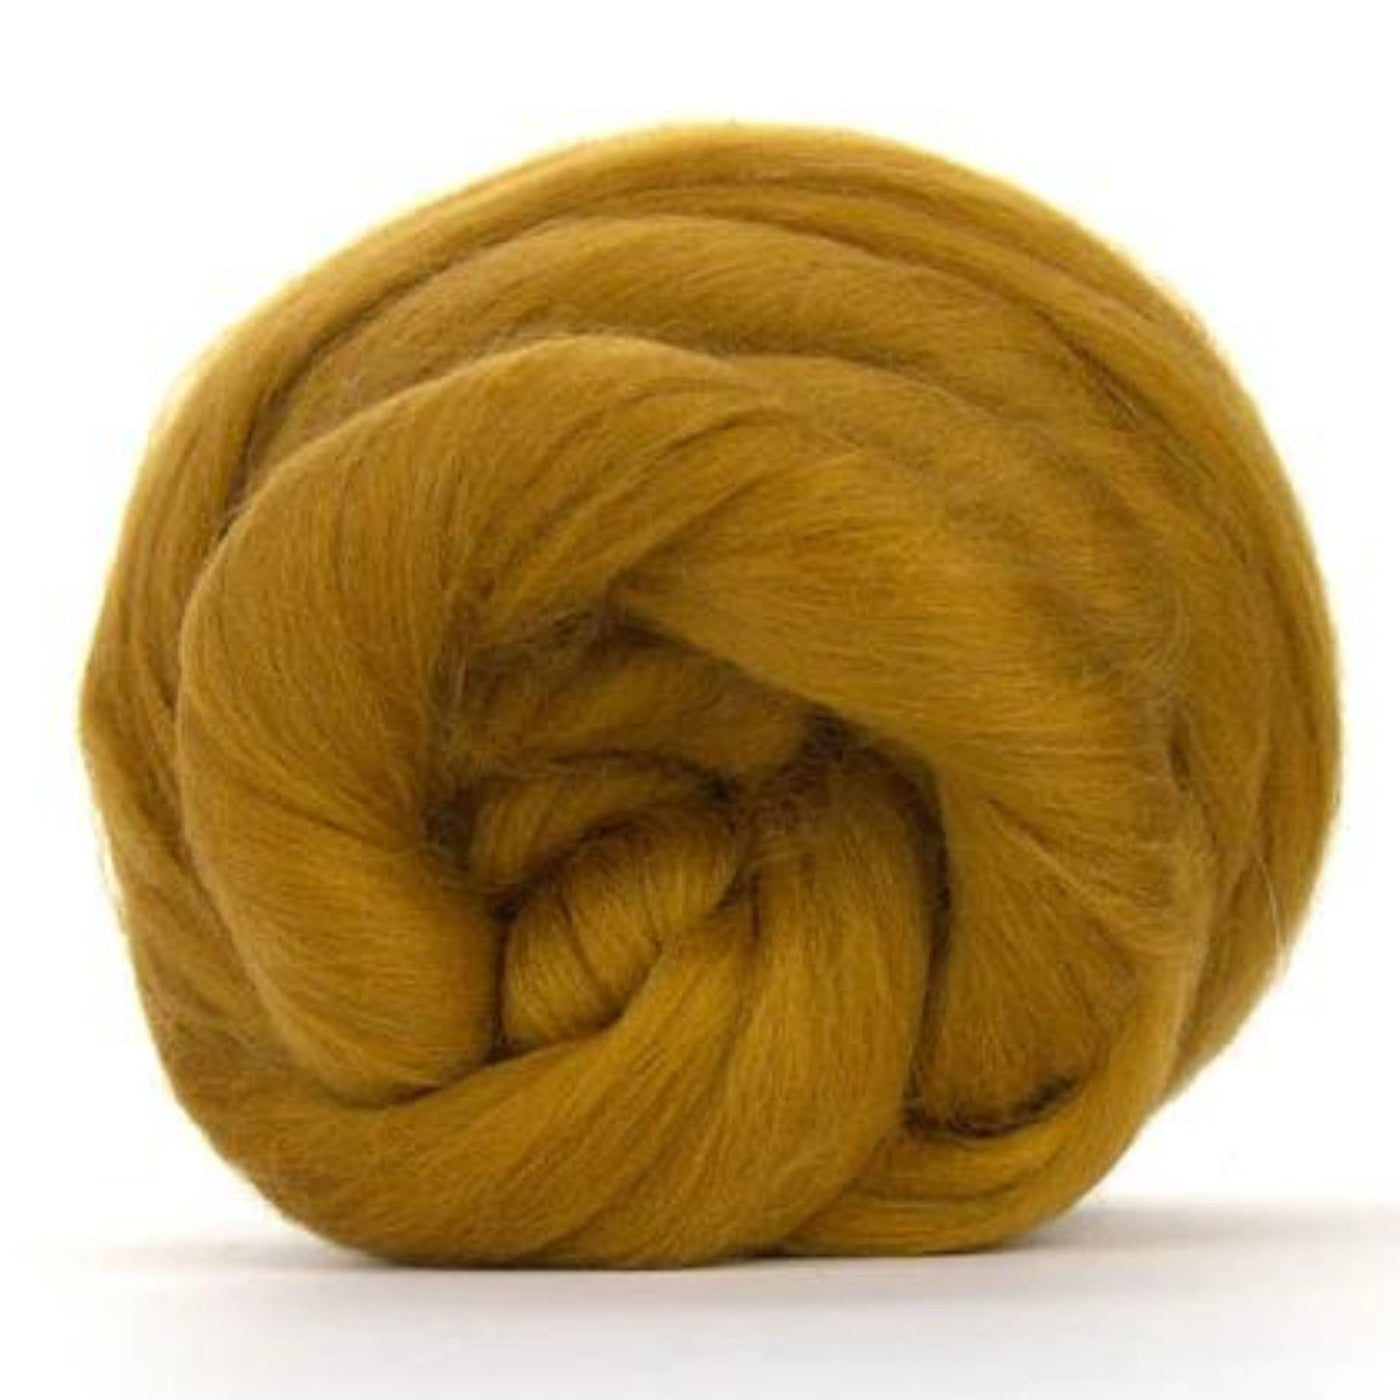 Revolution Fibers Corriedale Wool Roving 1 lb (16 ounces) for Spinning | Soft CH